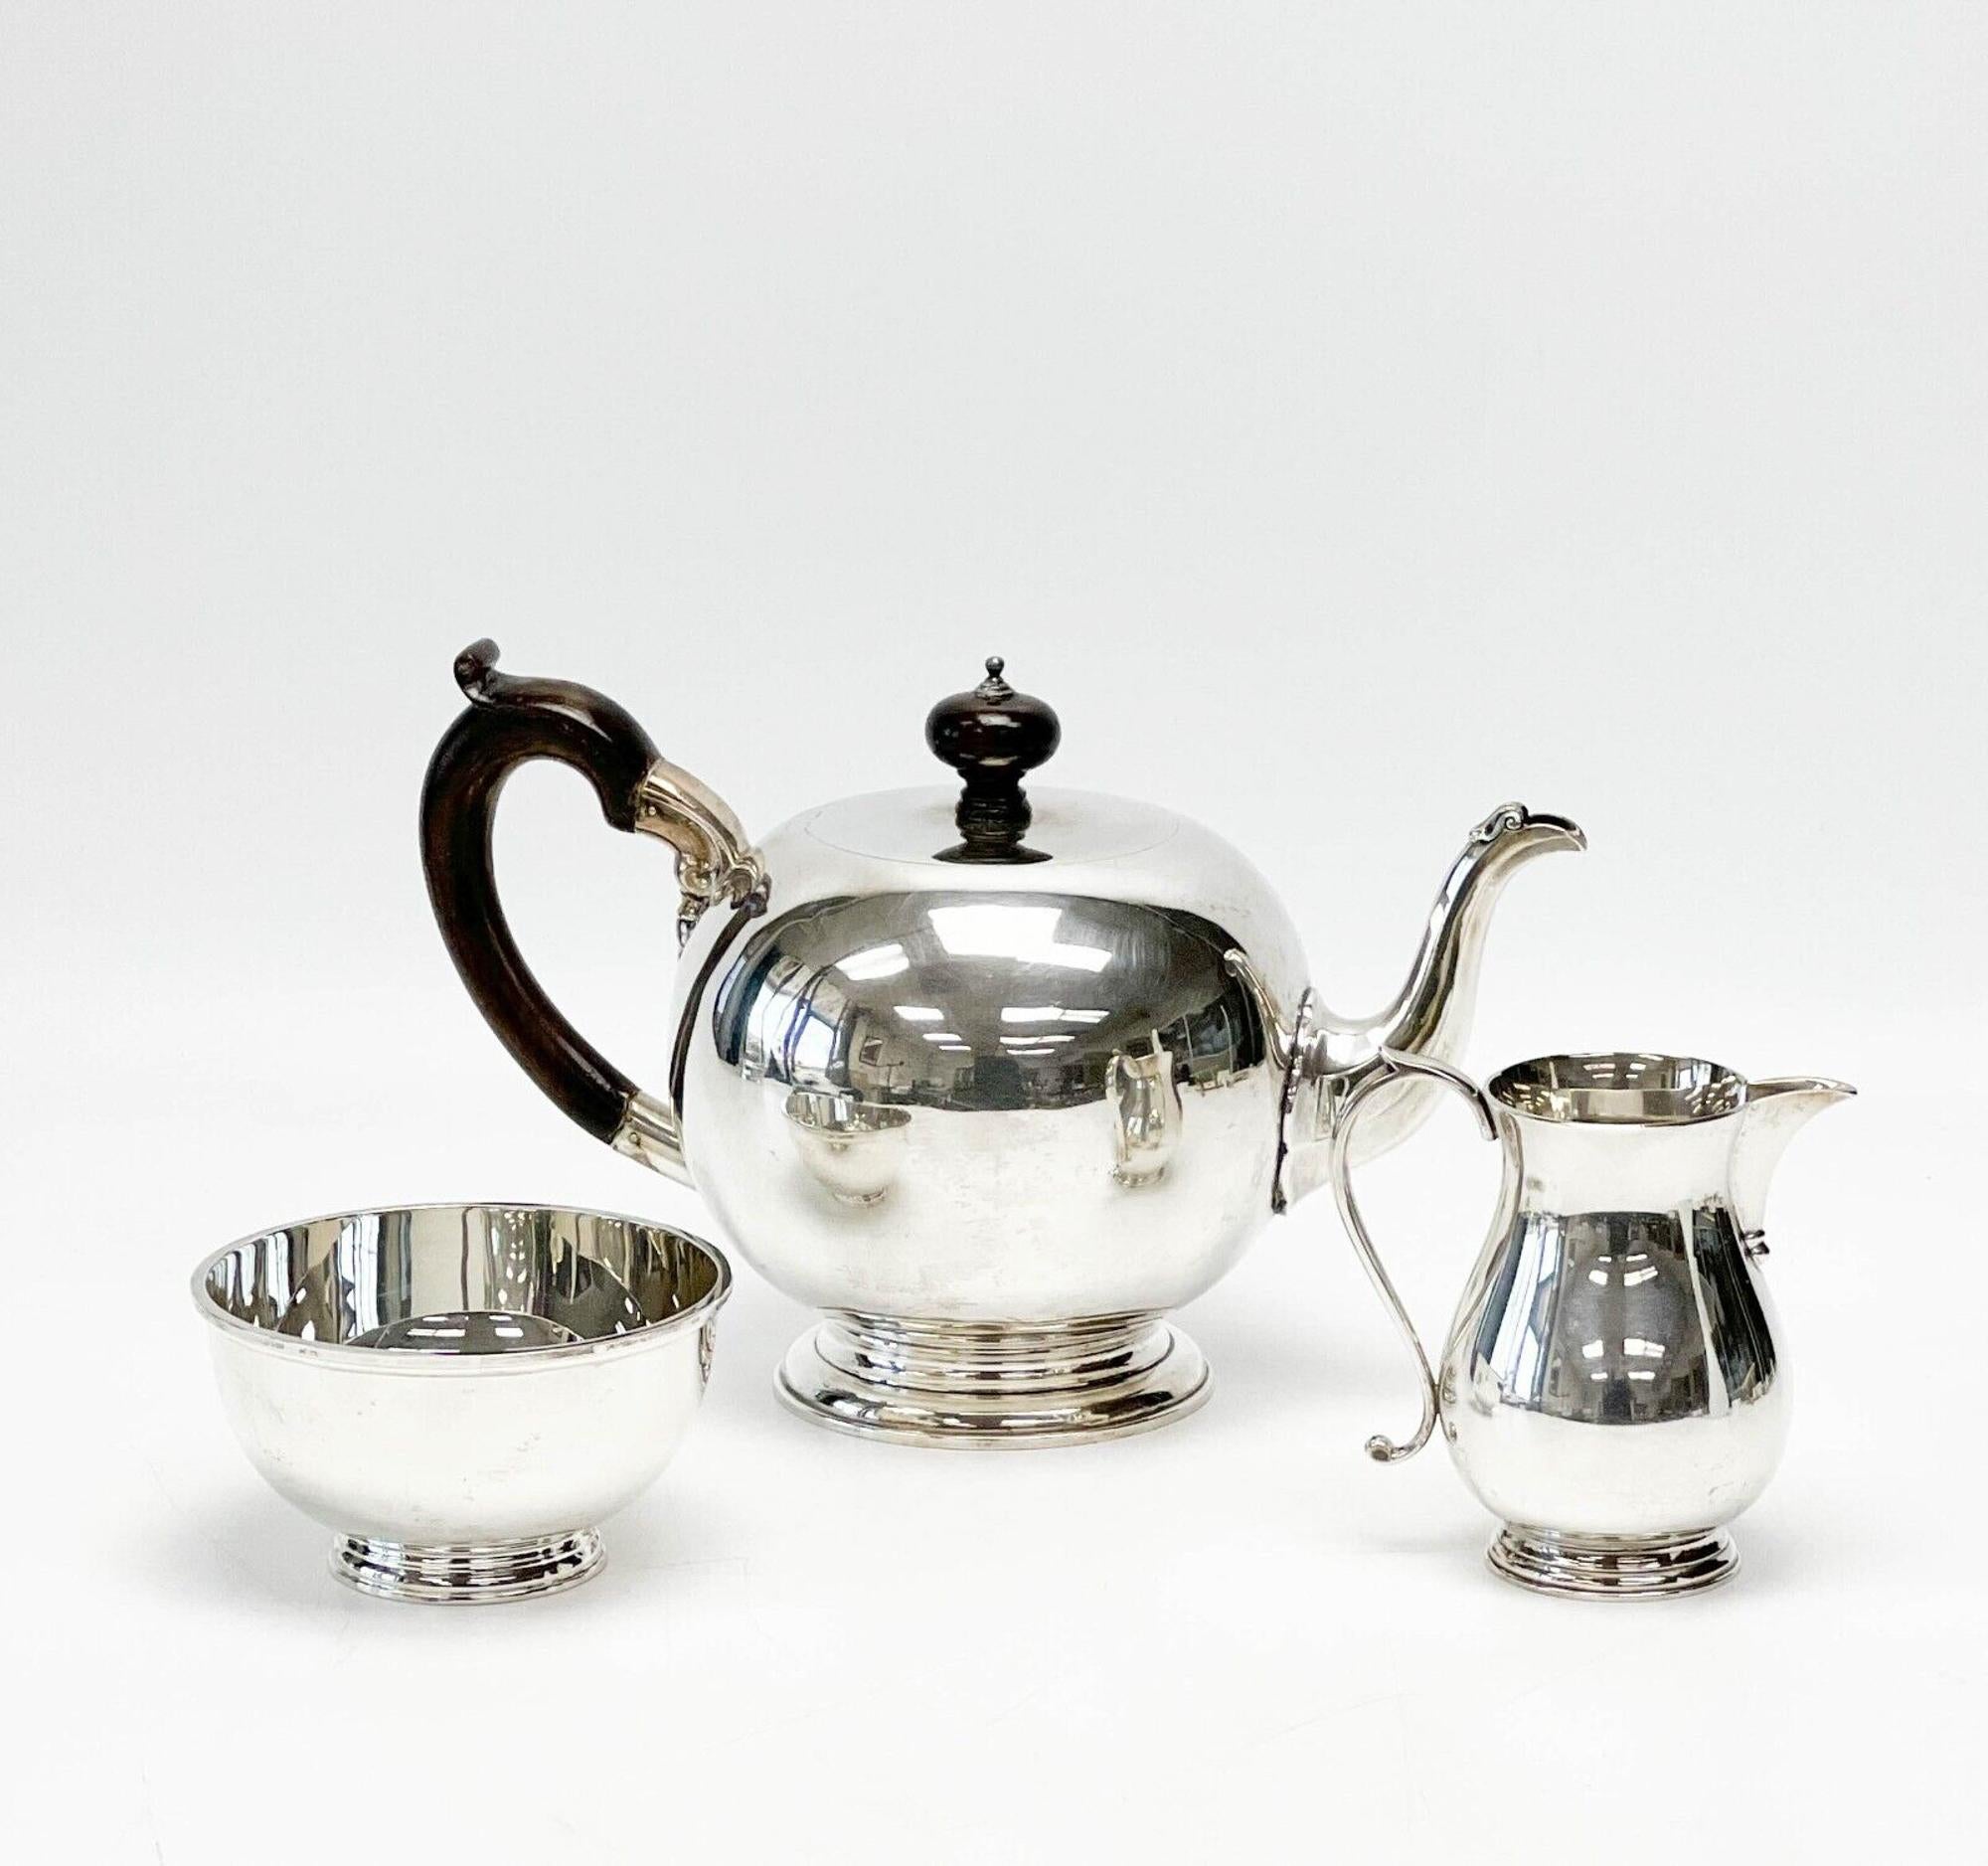 Asprey & Garrard England sterling silver tea set, 2000. Set includes teapot, creamer, and open sugar bowl. Teapot with wood handle and finial. Each with engraved monogram to the side. Asprey London hallmarks to the underside.

Additional